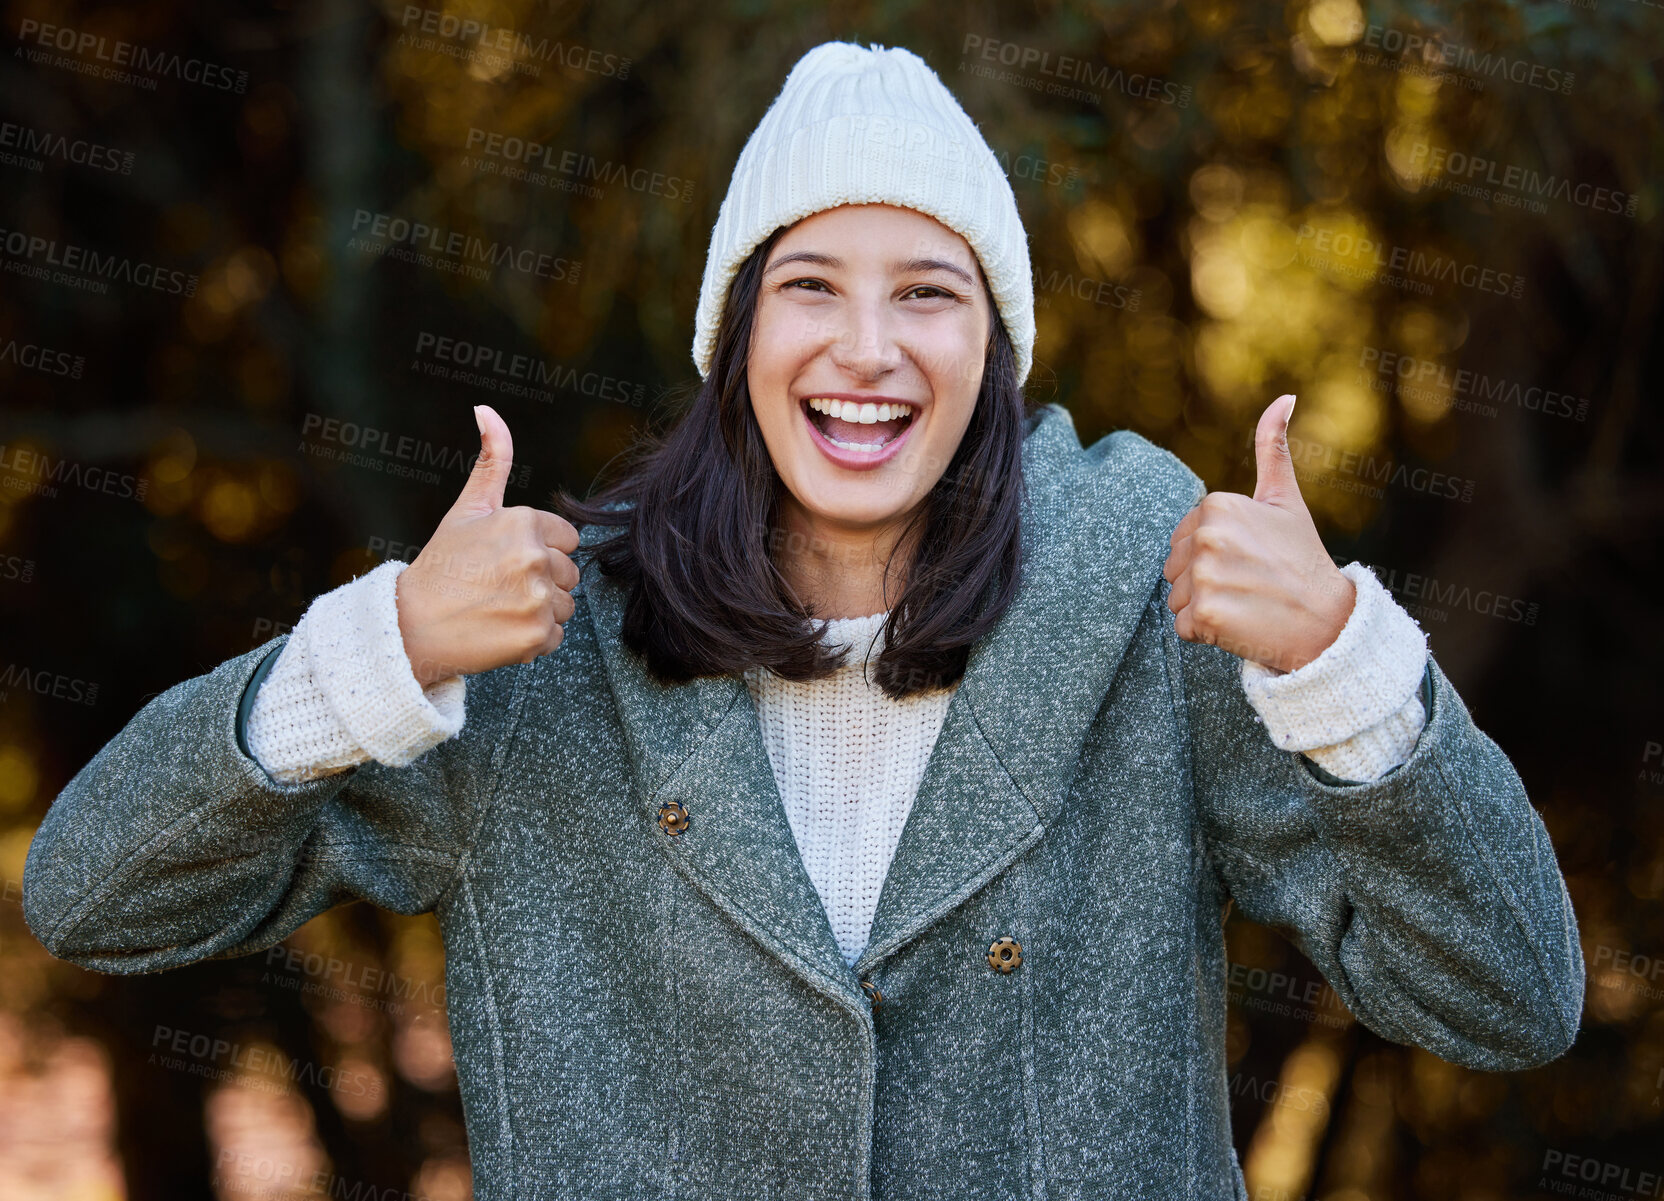 Buy stock photo Shot of an attractive young woman standing alone outside and showing a thumbs up